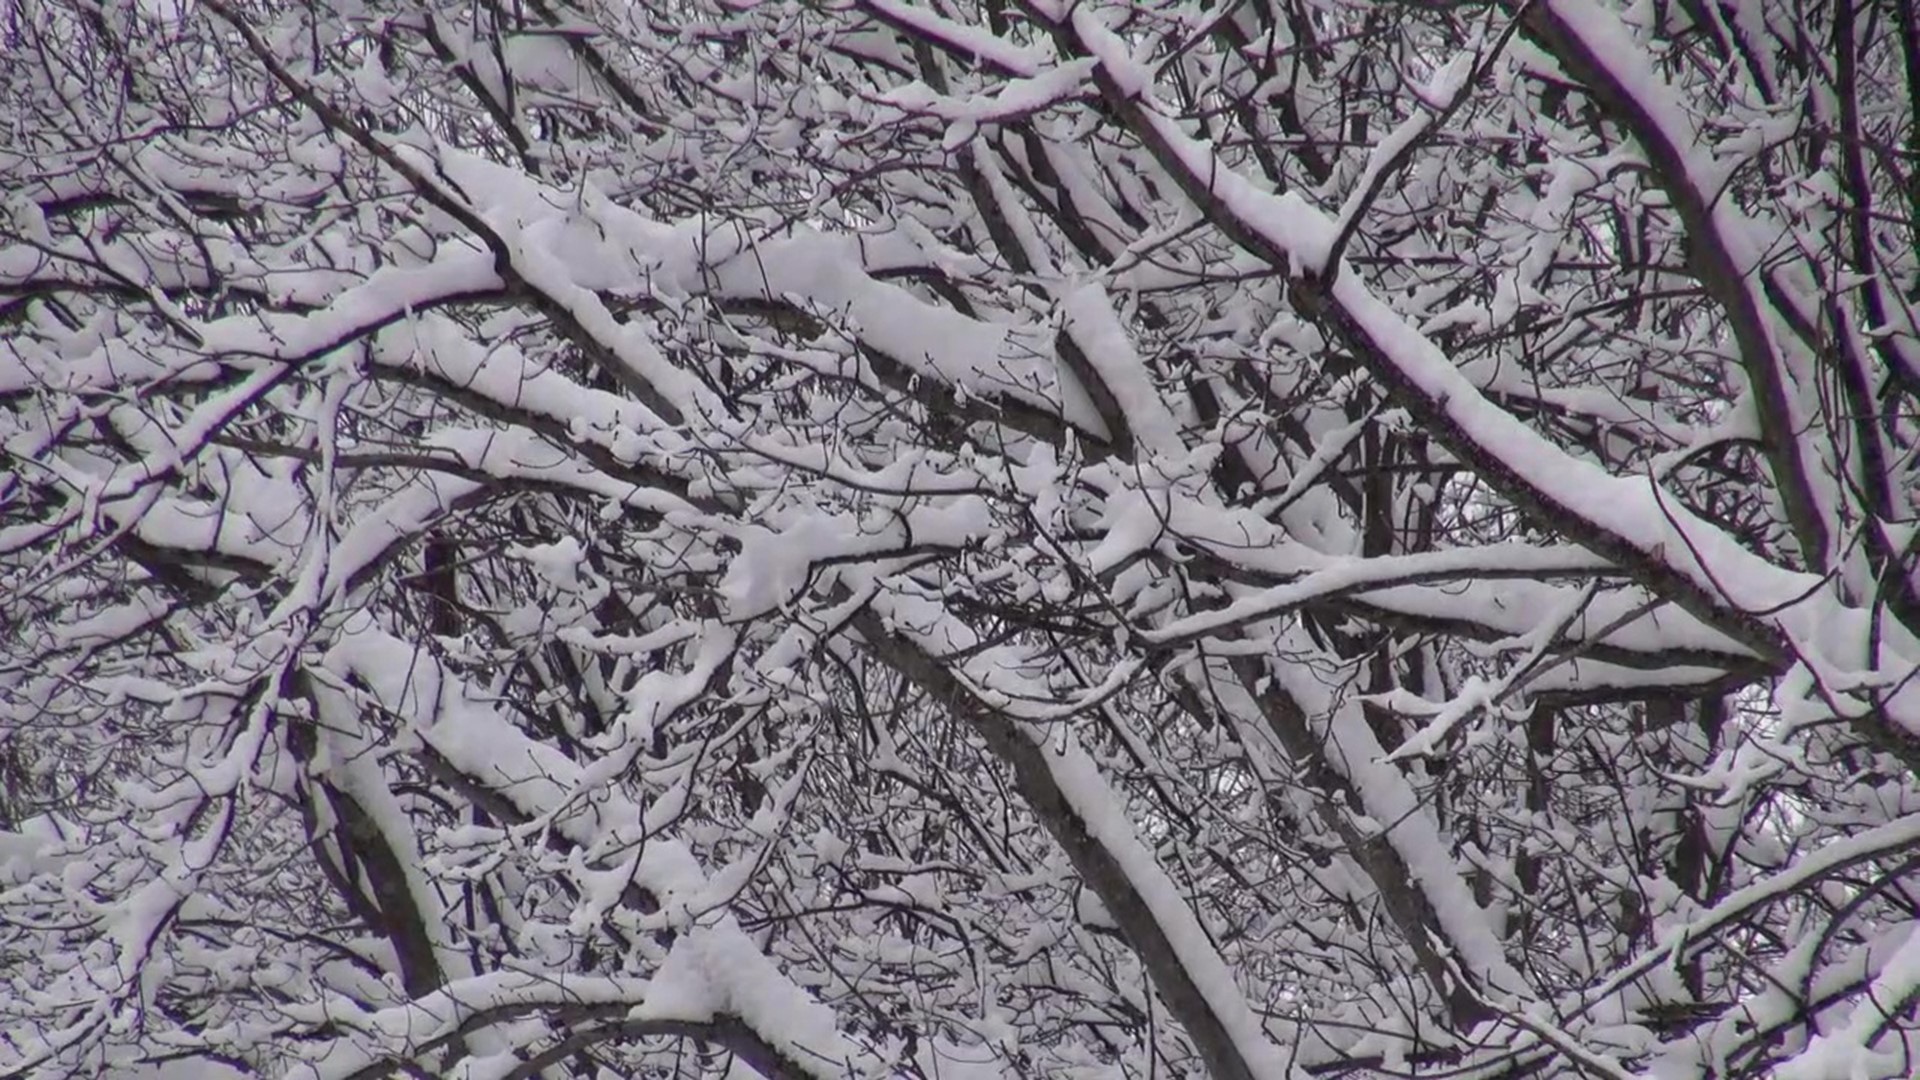 Parts of Wayne County got anywhere from 5 to 8 inches of snow, after snow fell all day on Sunday.